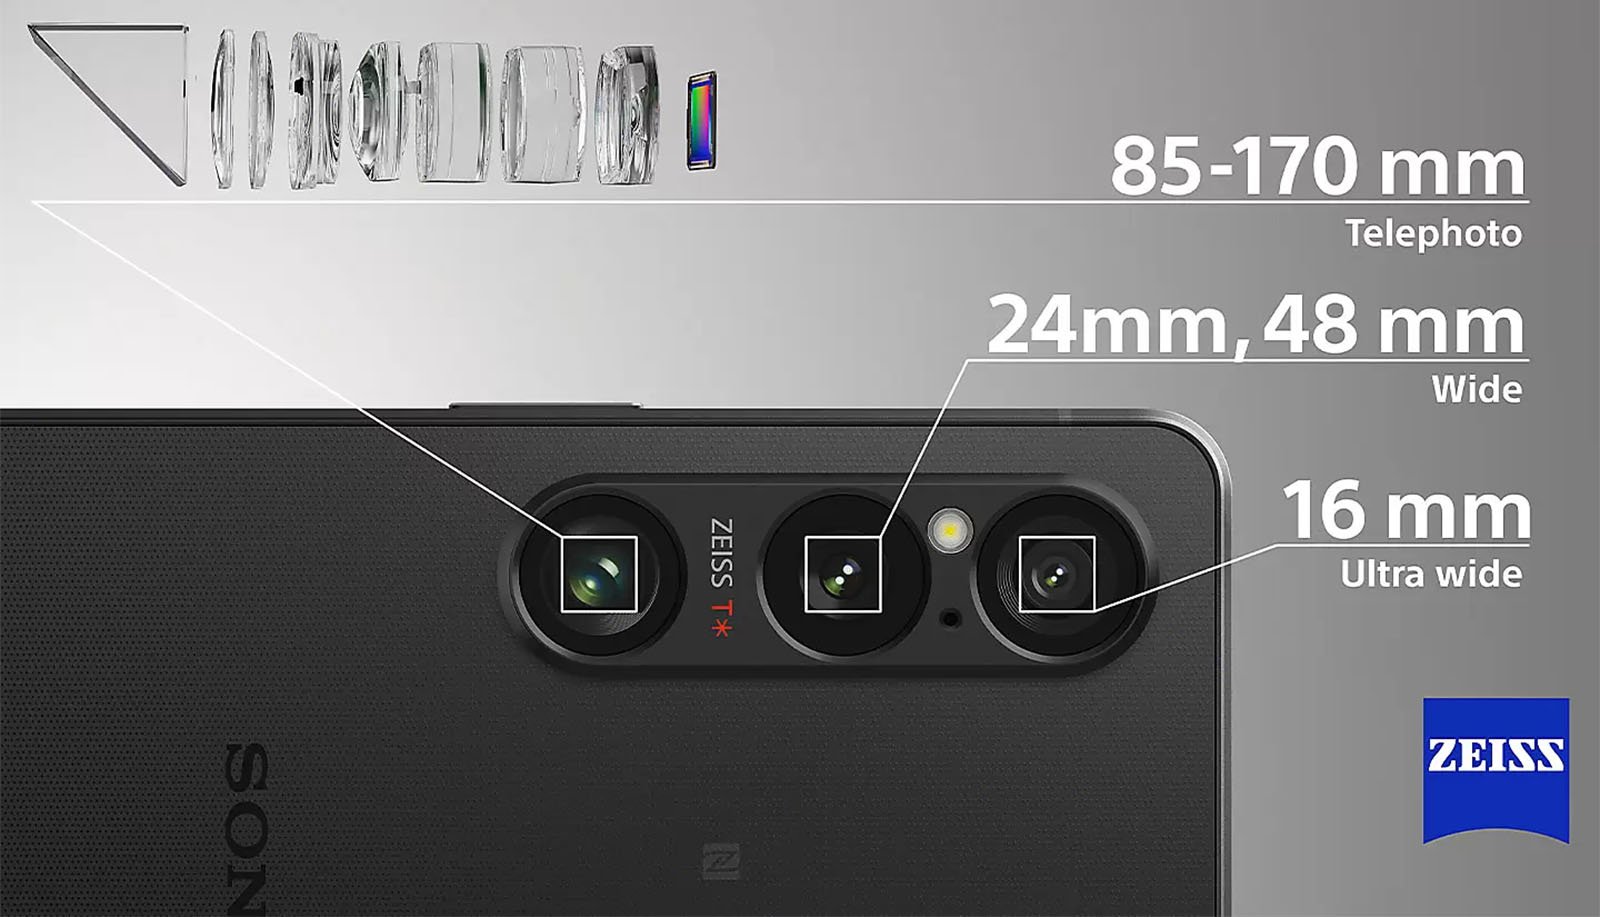 This image showcases the rear camera setup of a smartphone, highlighting the specifications of its lenses. The phone features a 16mm ultra-wide lens, 24mm and 48mm wide lenses, and an 85-170mm telephoto lens, with ZEISS branding on the lenses.